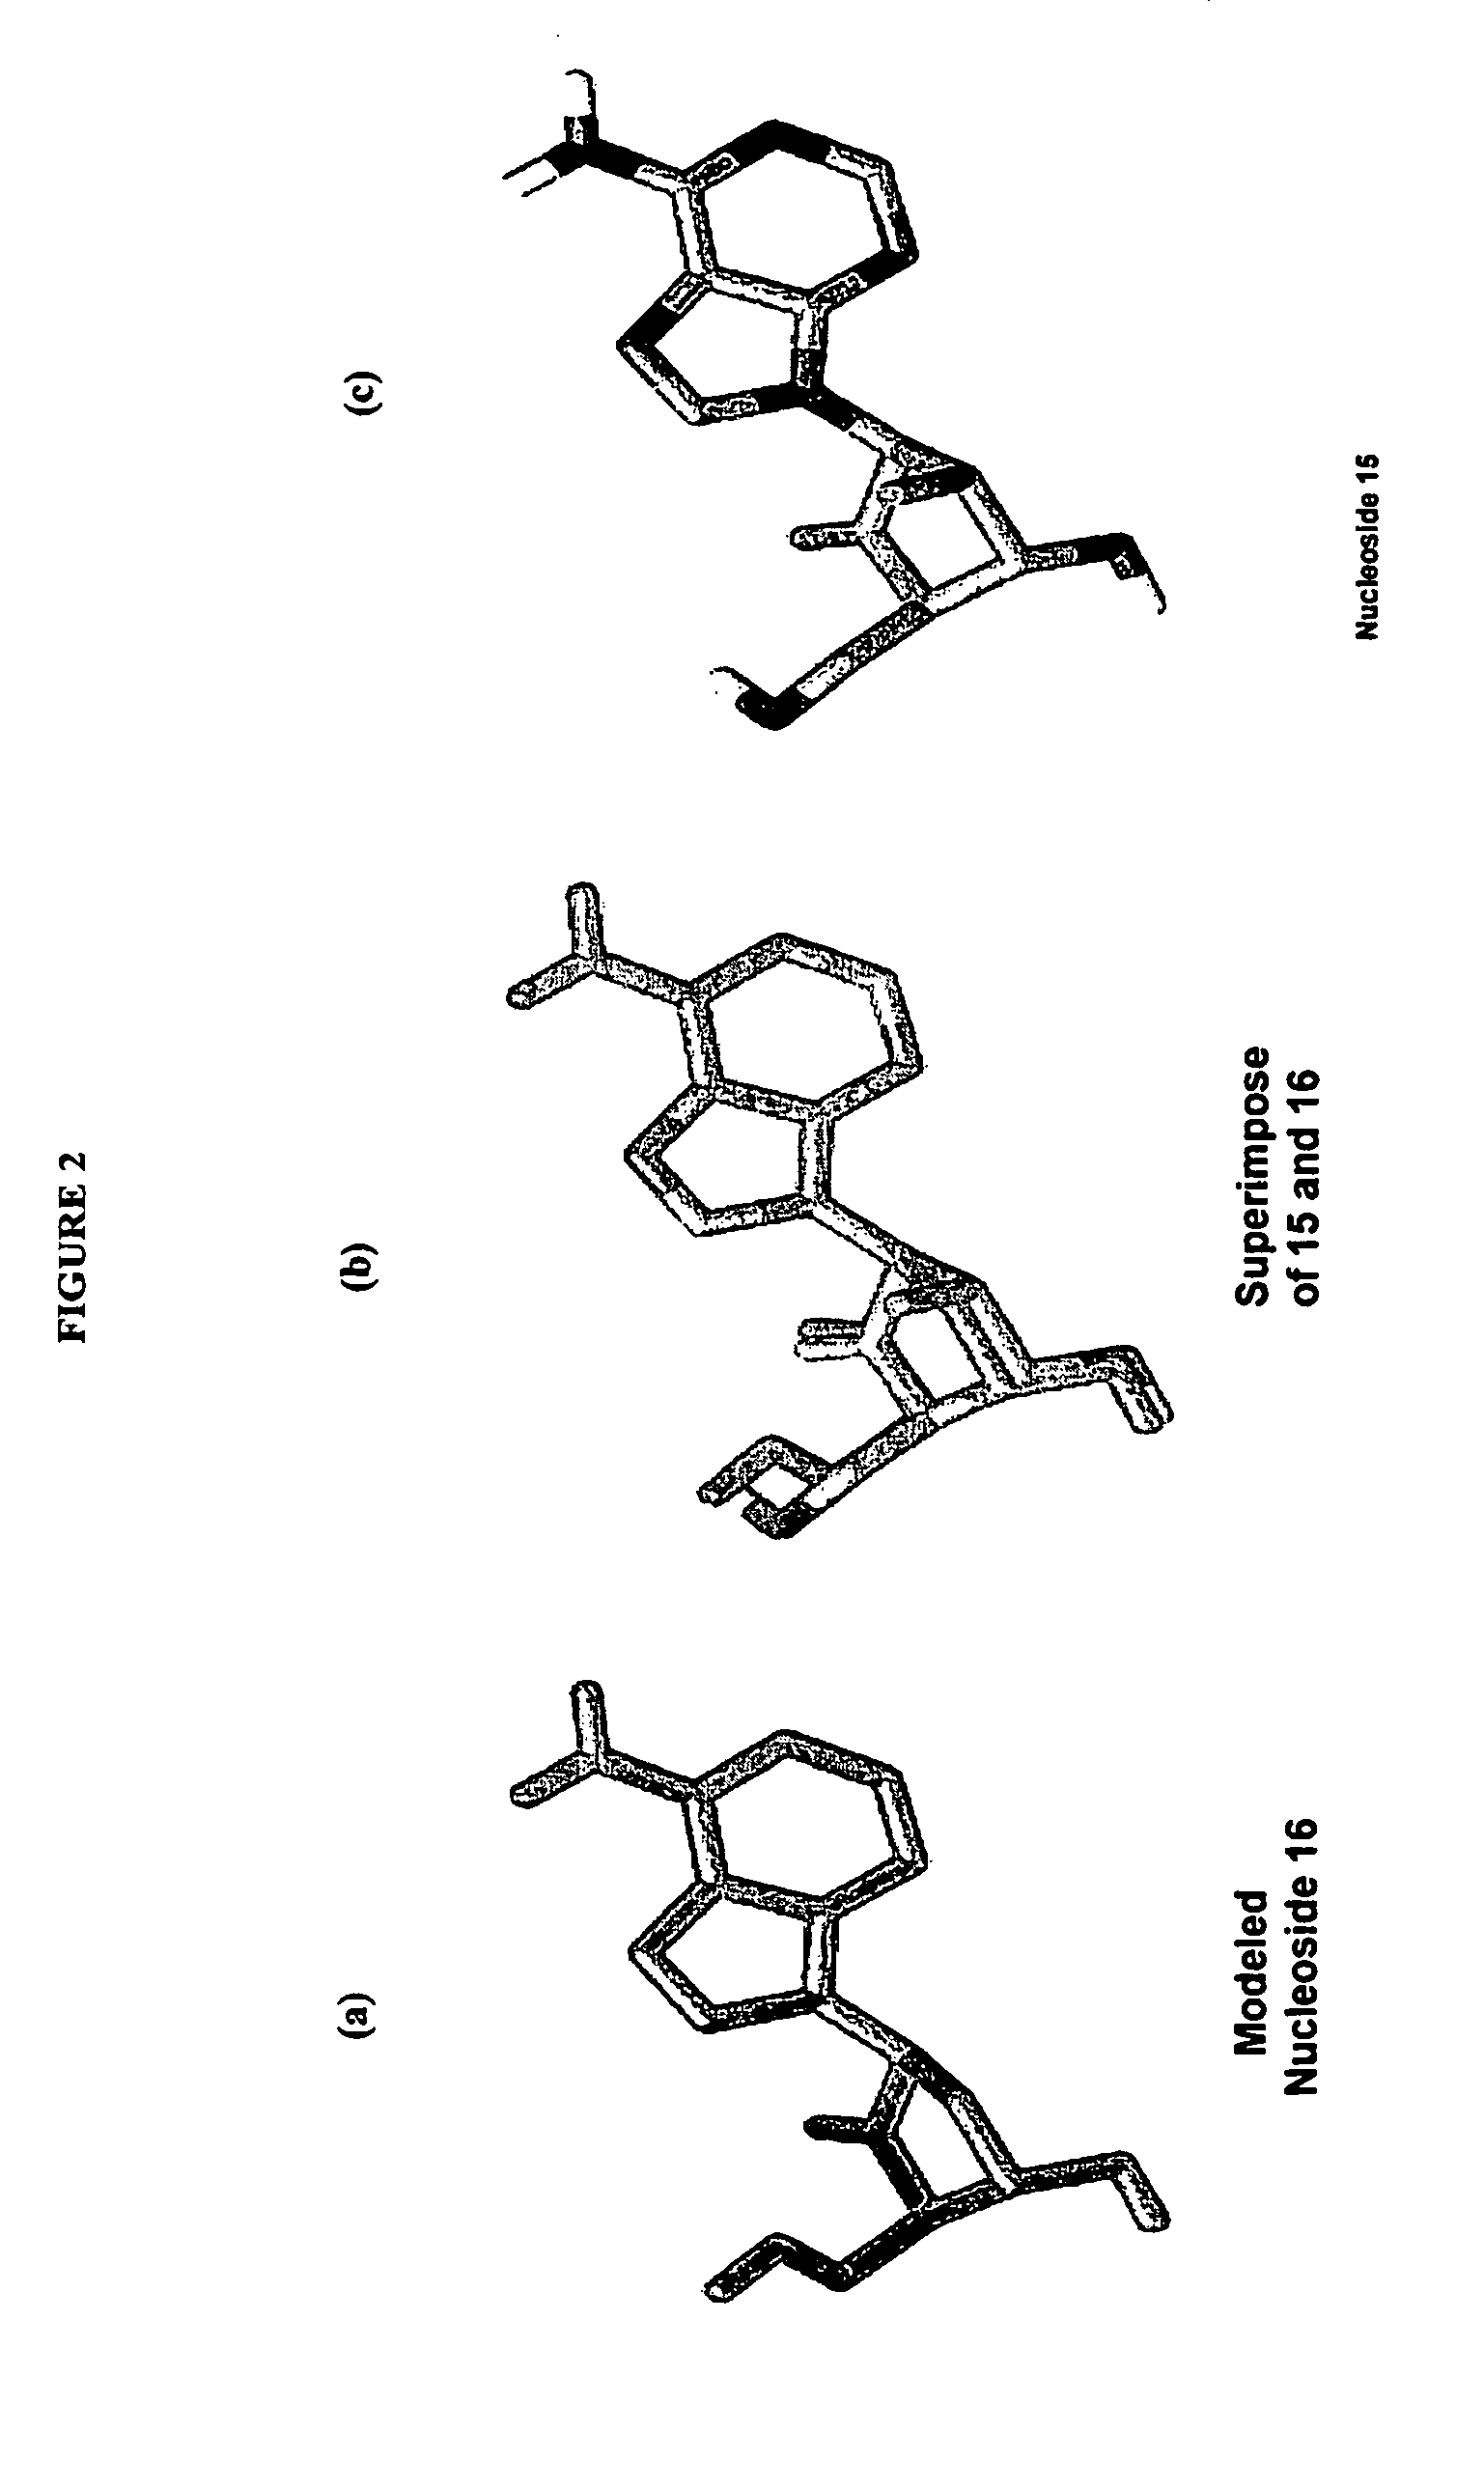 2′-fluoro-6′methylene carbocyclic nucleosides and methods of treating viral infections